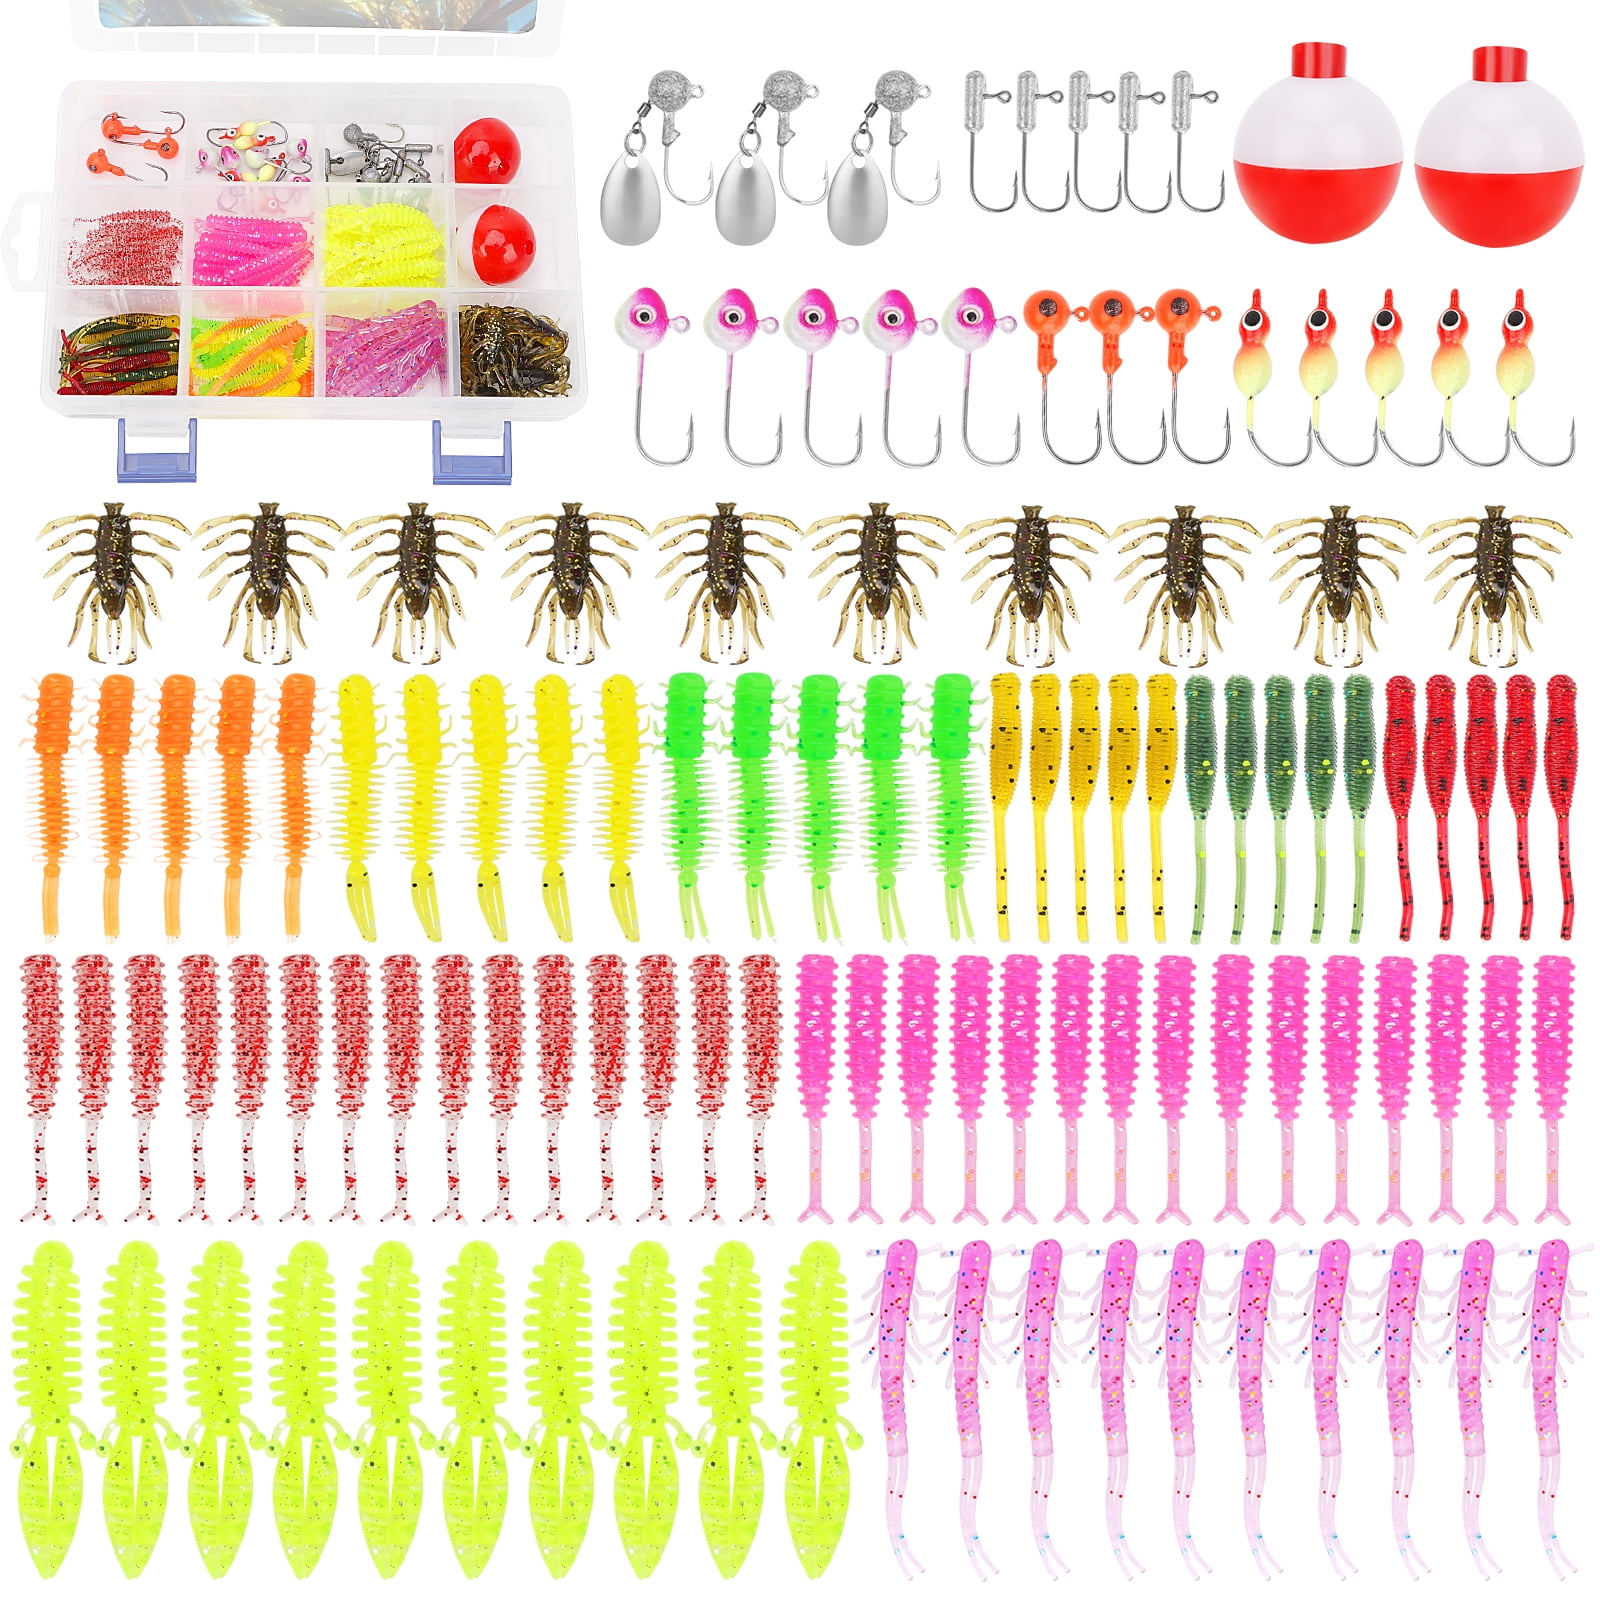 * 60pcs/box Bass Lure Kit, Fishing Soft Plastic Lure For Crappie Walleye  Trout, Fishing Baits With Tackle Box